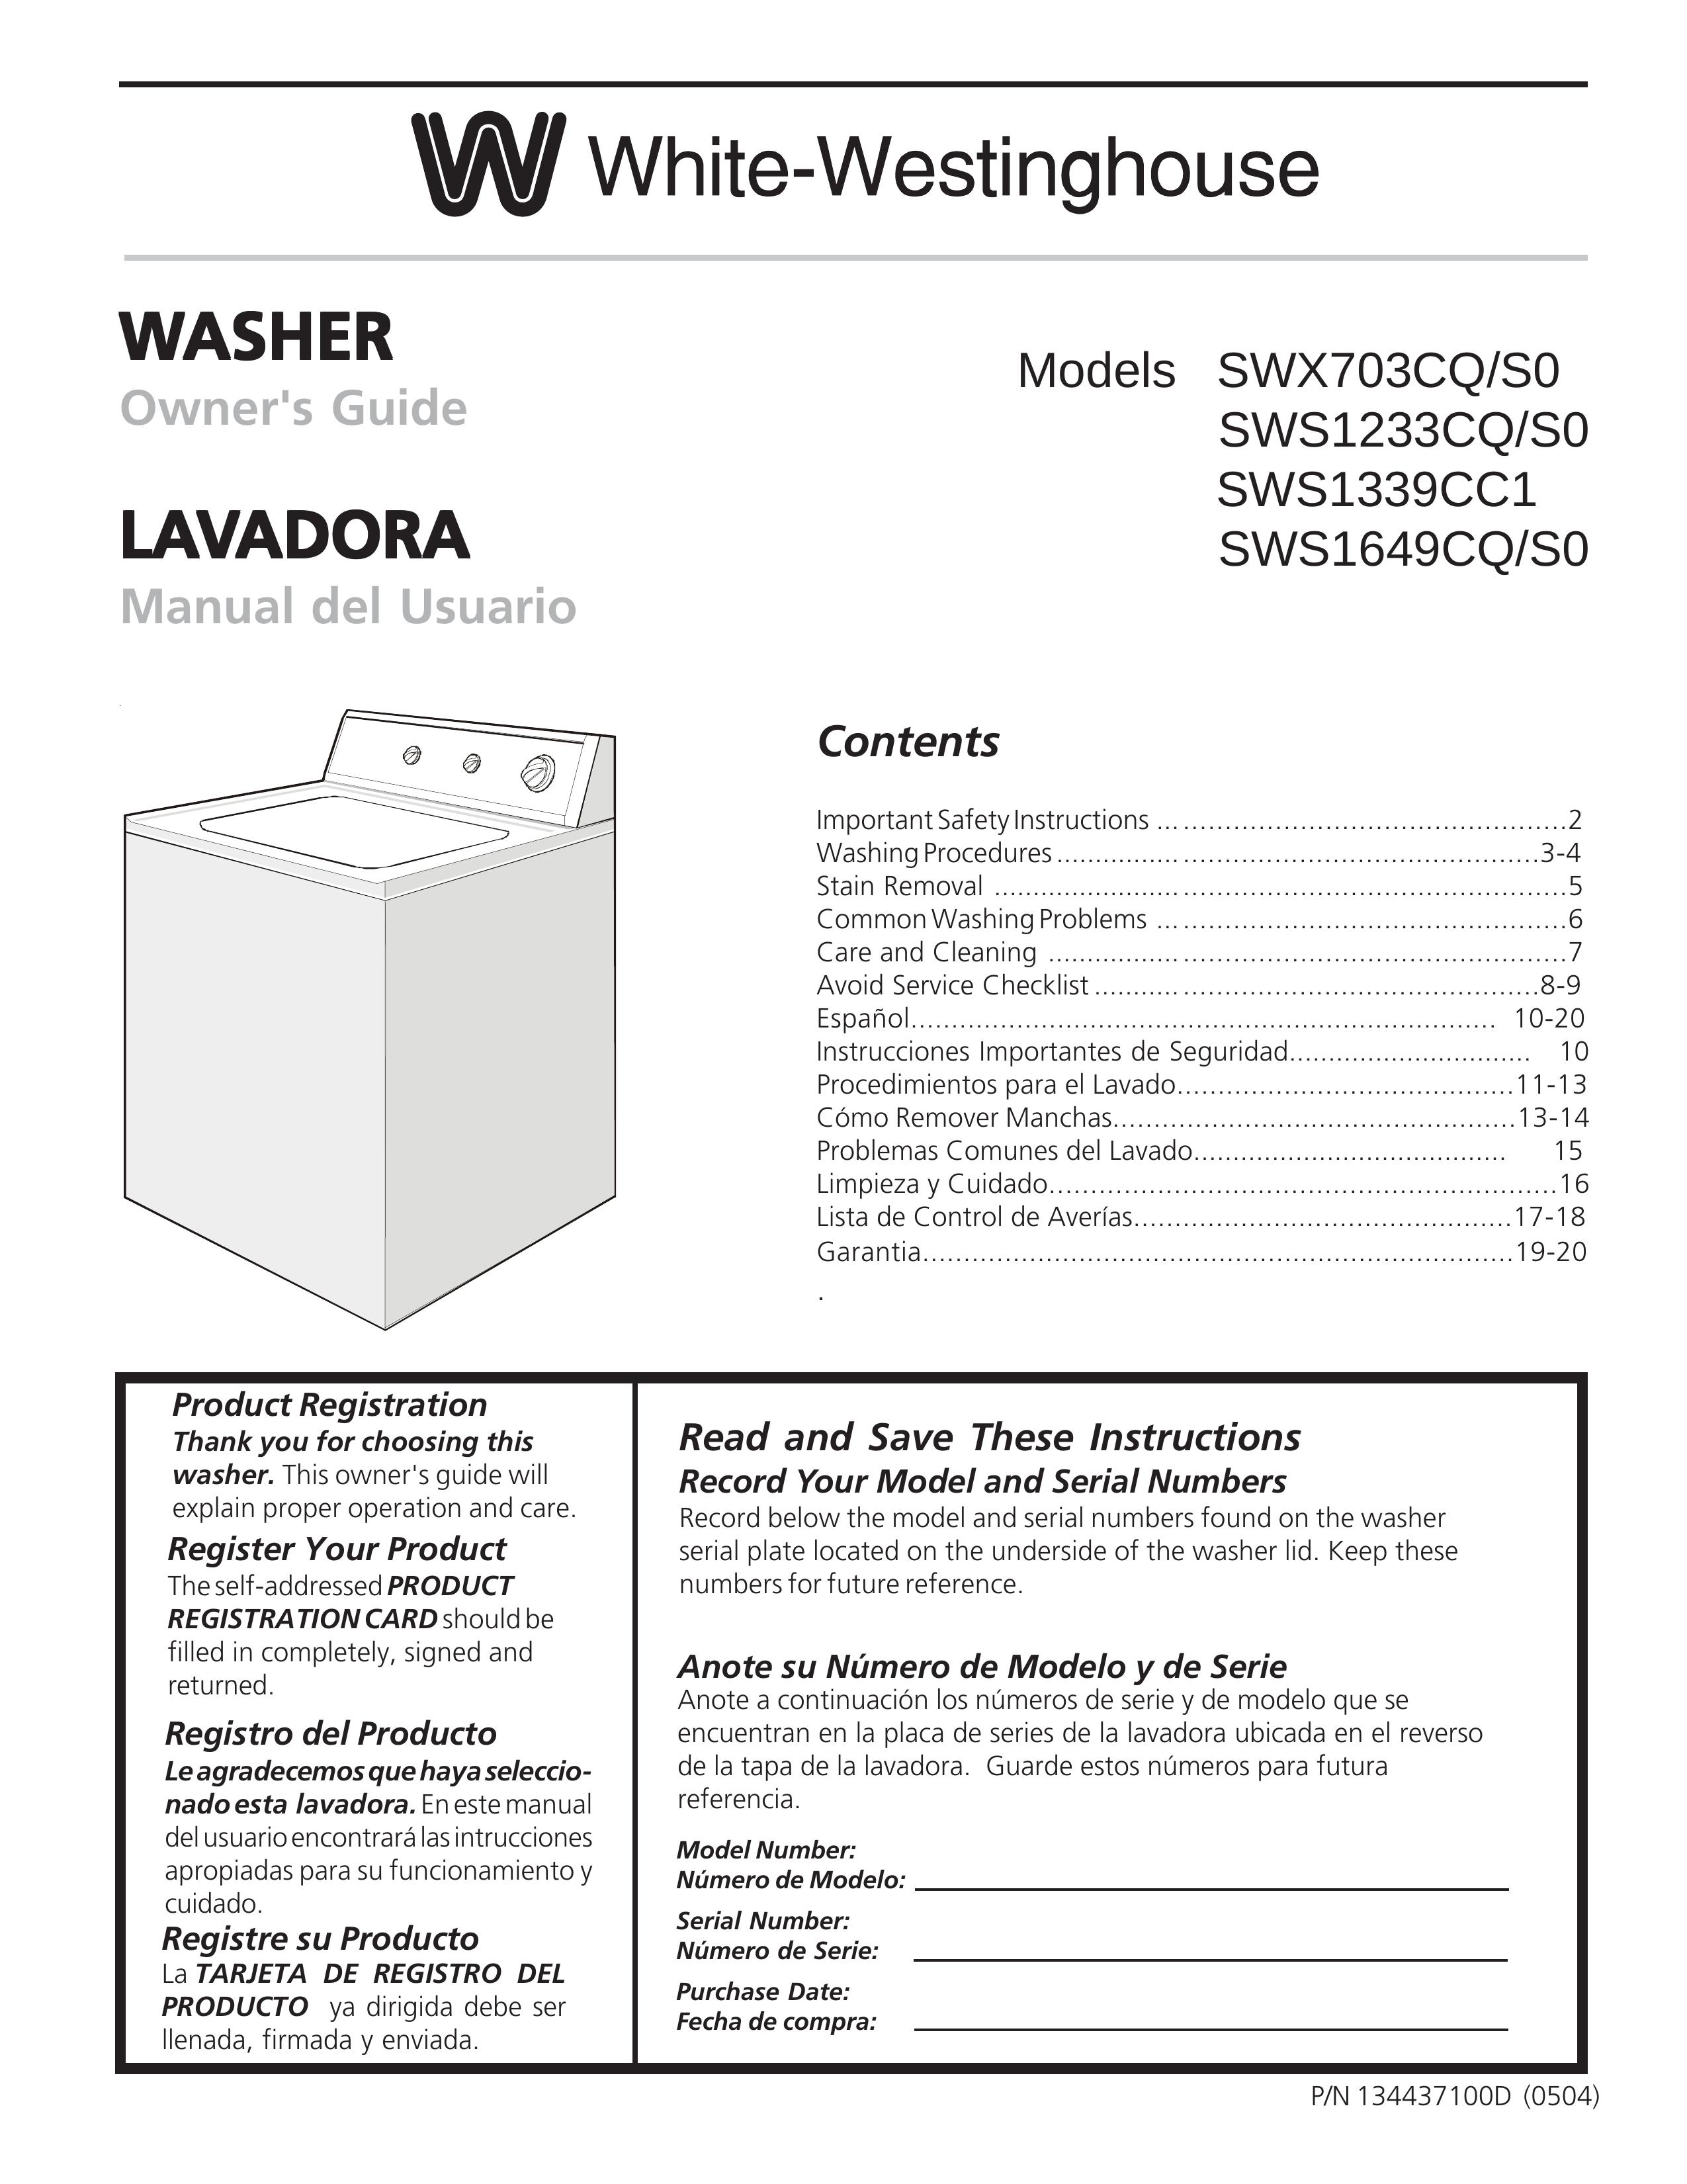 White-Westinghouse SWS1339CC1 Washer User Manual